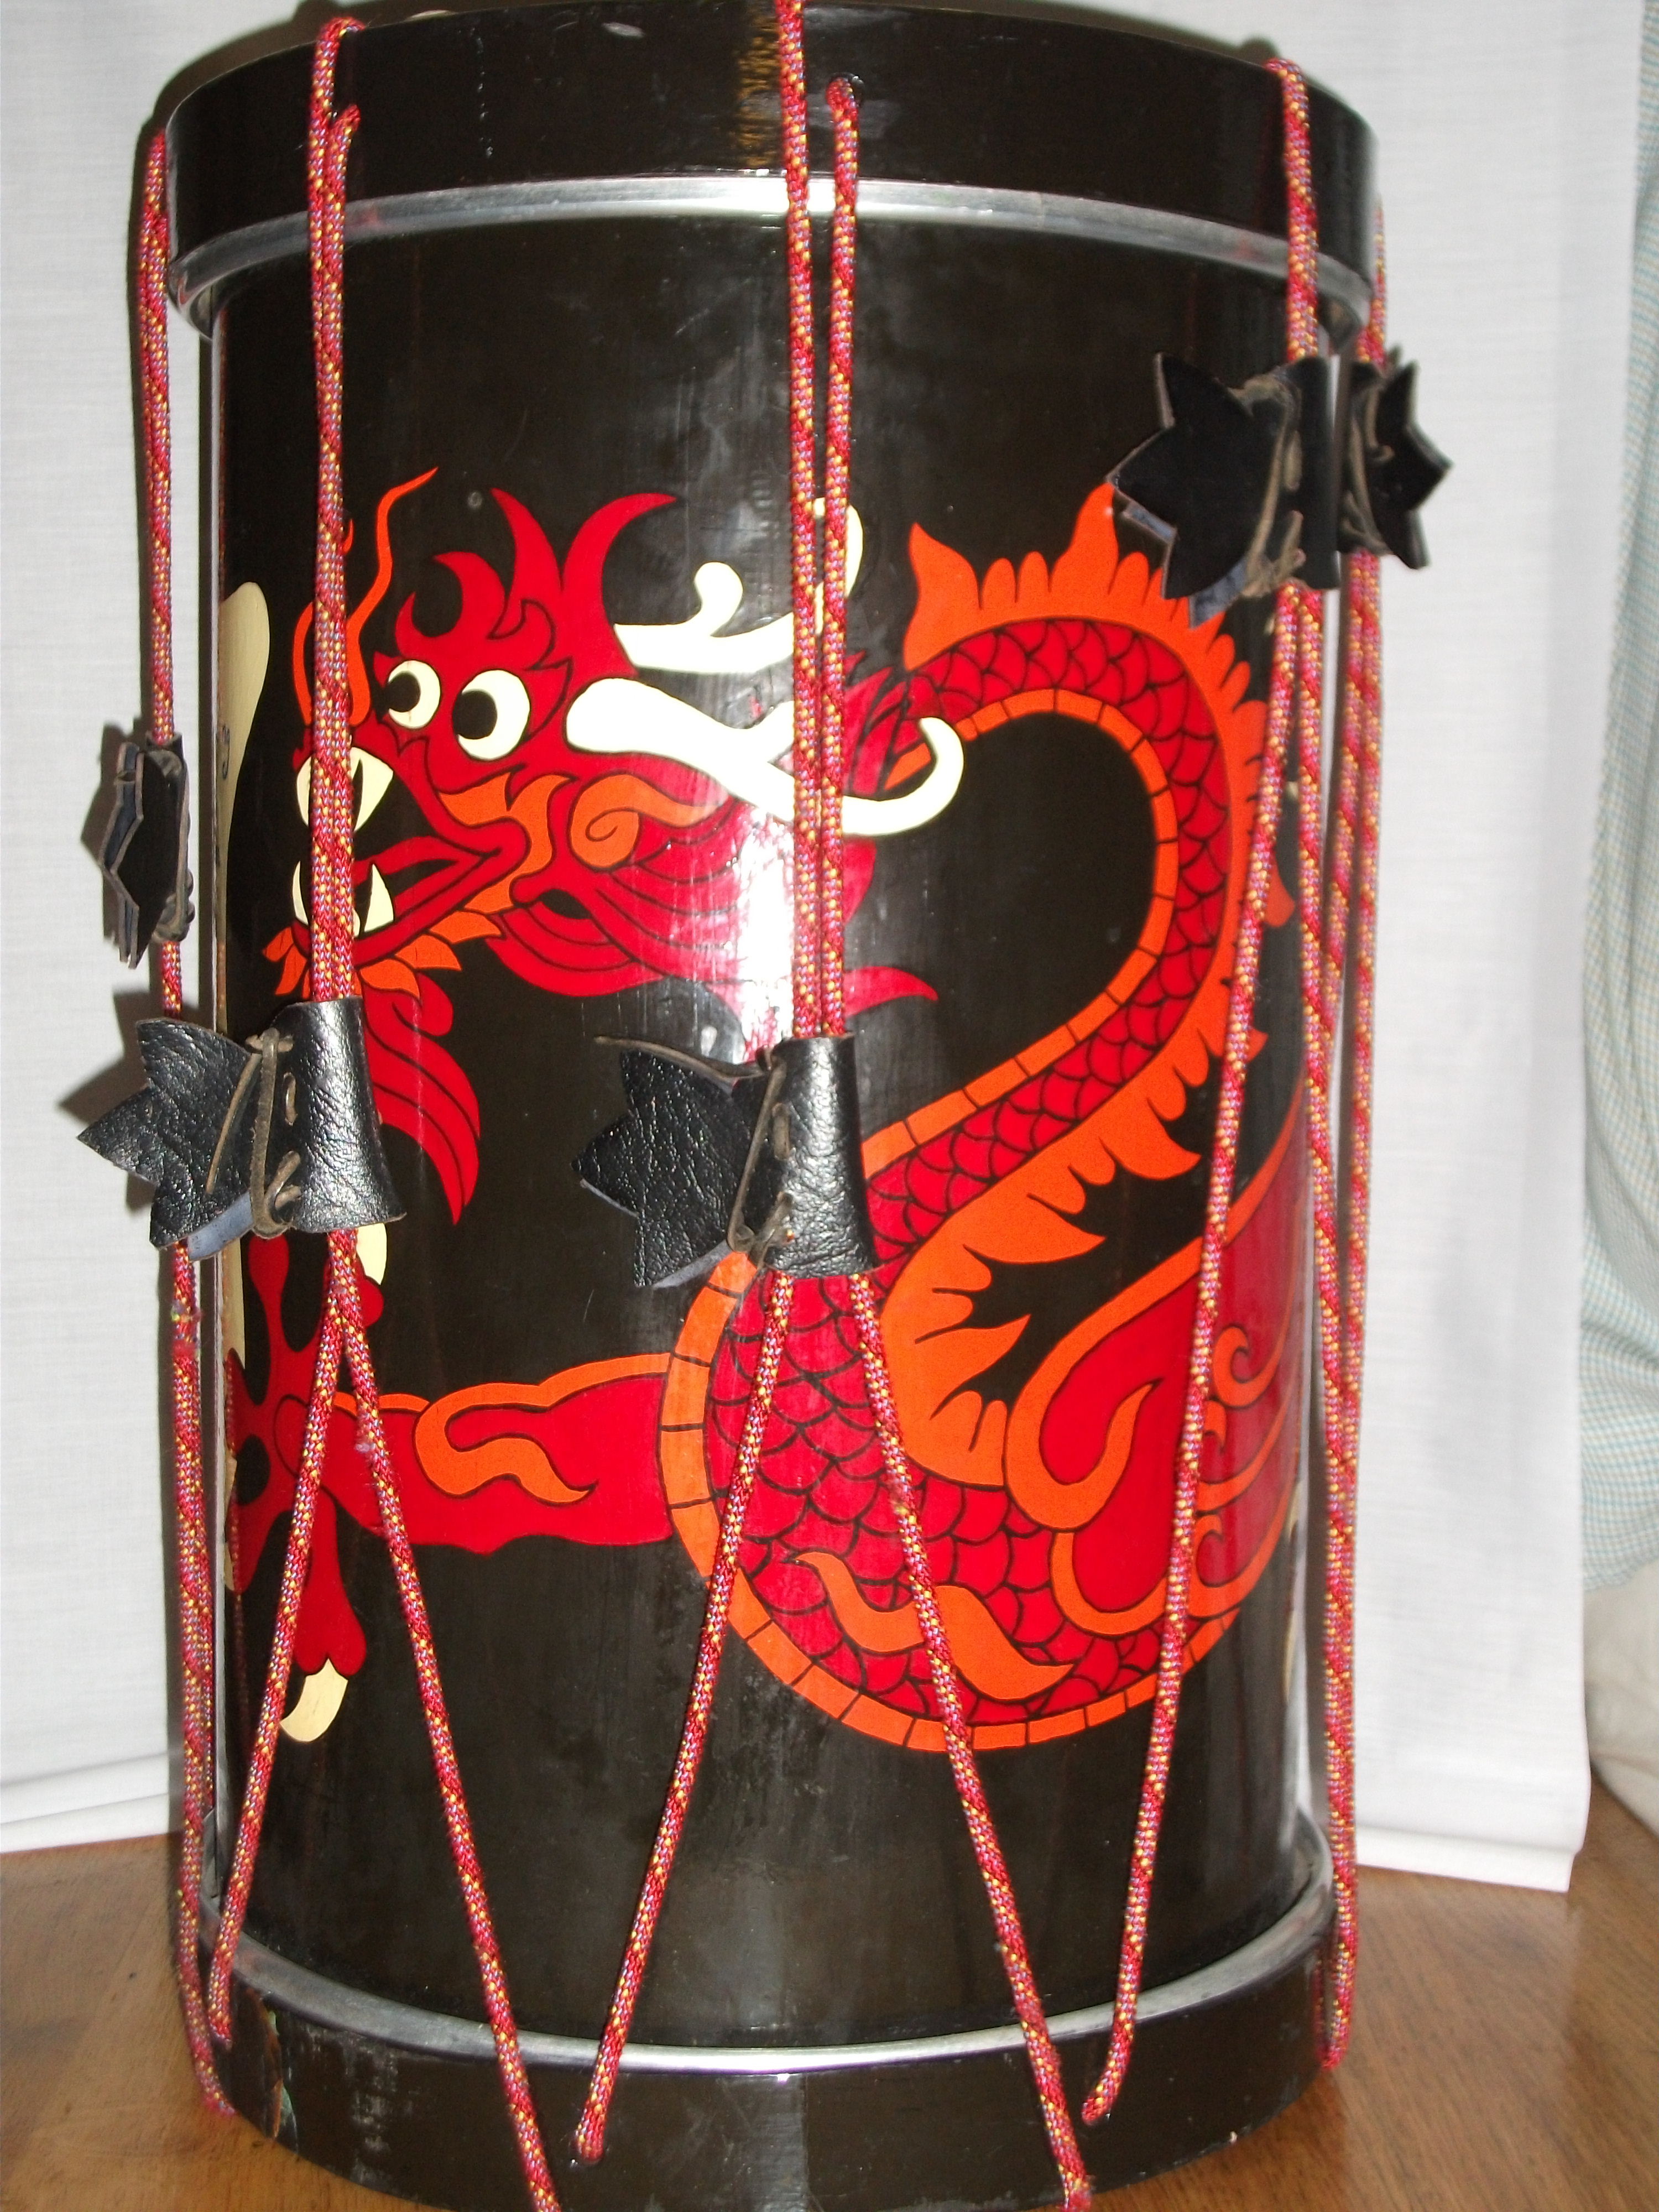 Tall drum, painted black with an oriental dragon painted in red circling around the body of the drum. The top and bottom drum skins are kept in tension by red cord running the full height of the drum in a zig-zag pattern.